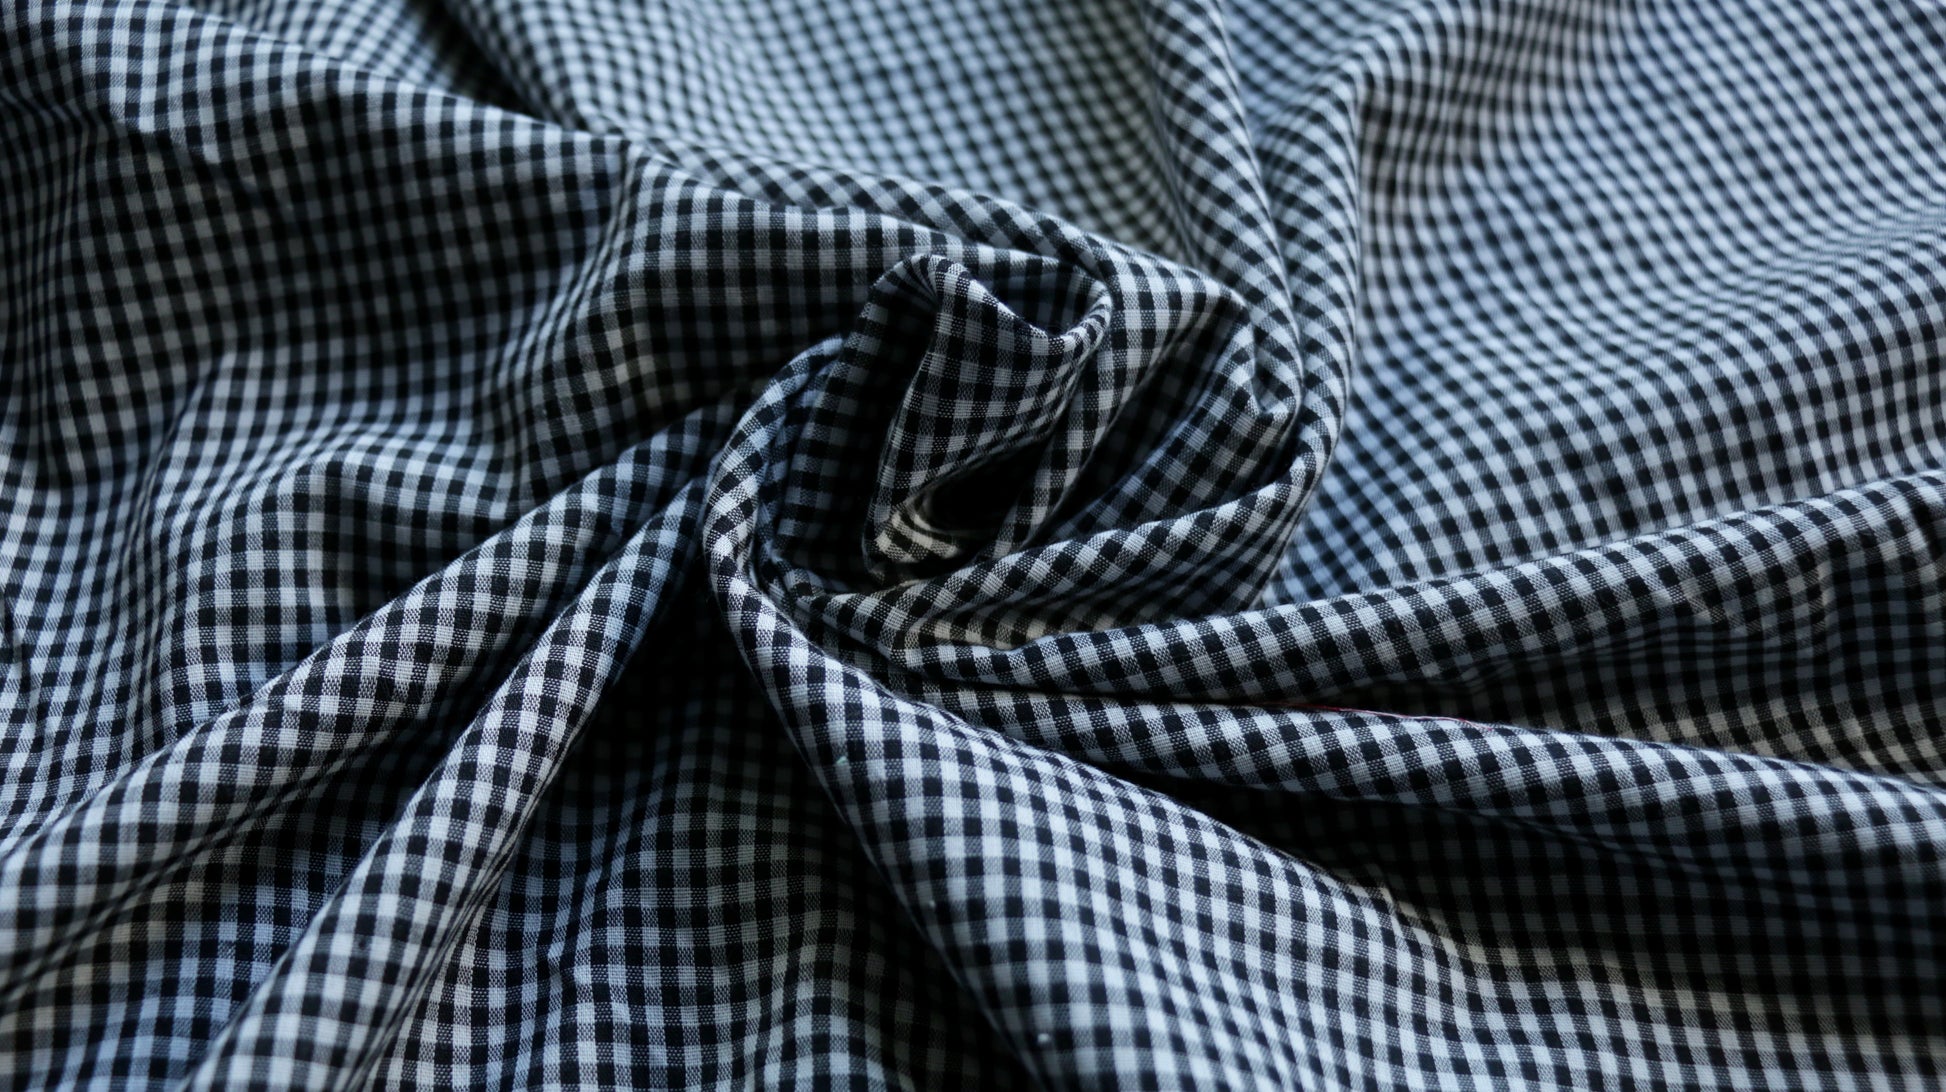 polycotton-lawn-fabric-black-and-white-1-12-gingham-design-clothcontrol